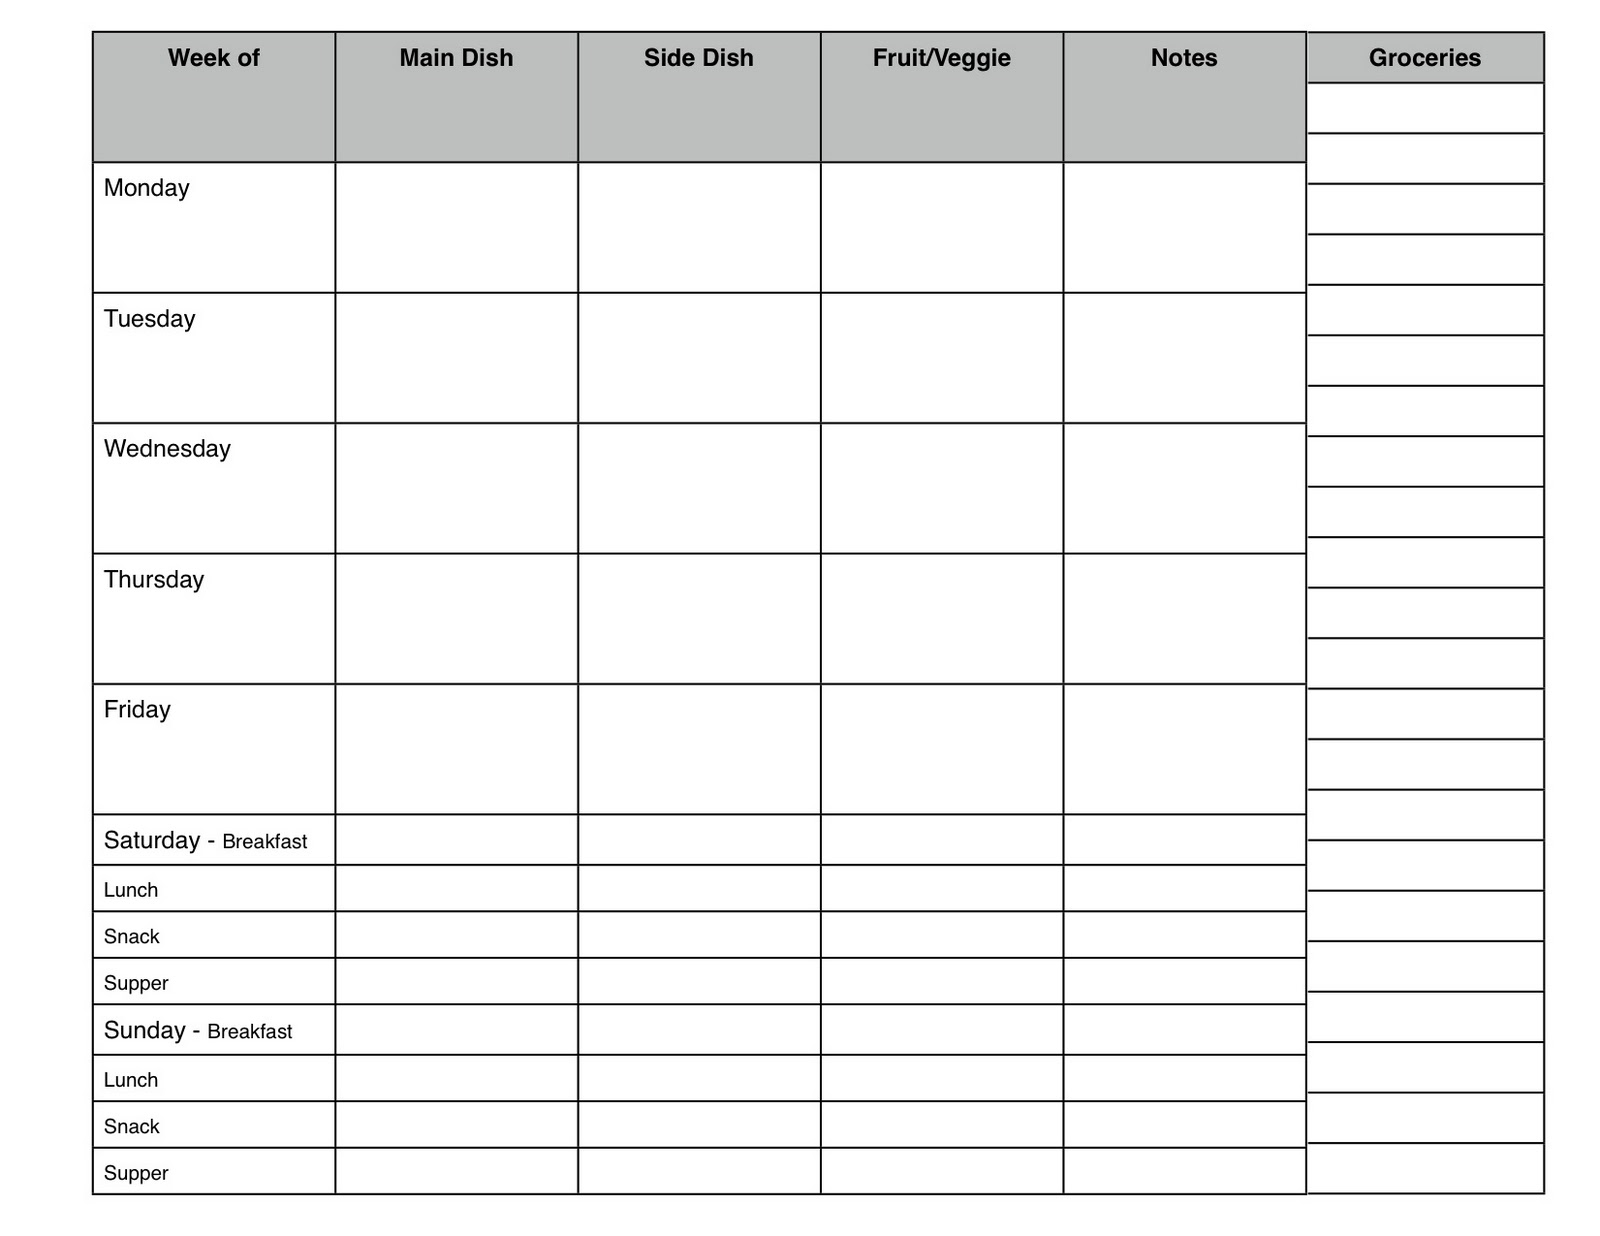 100 day plan template